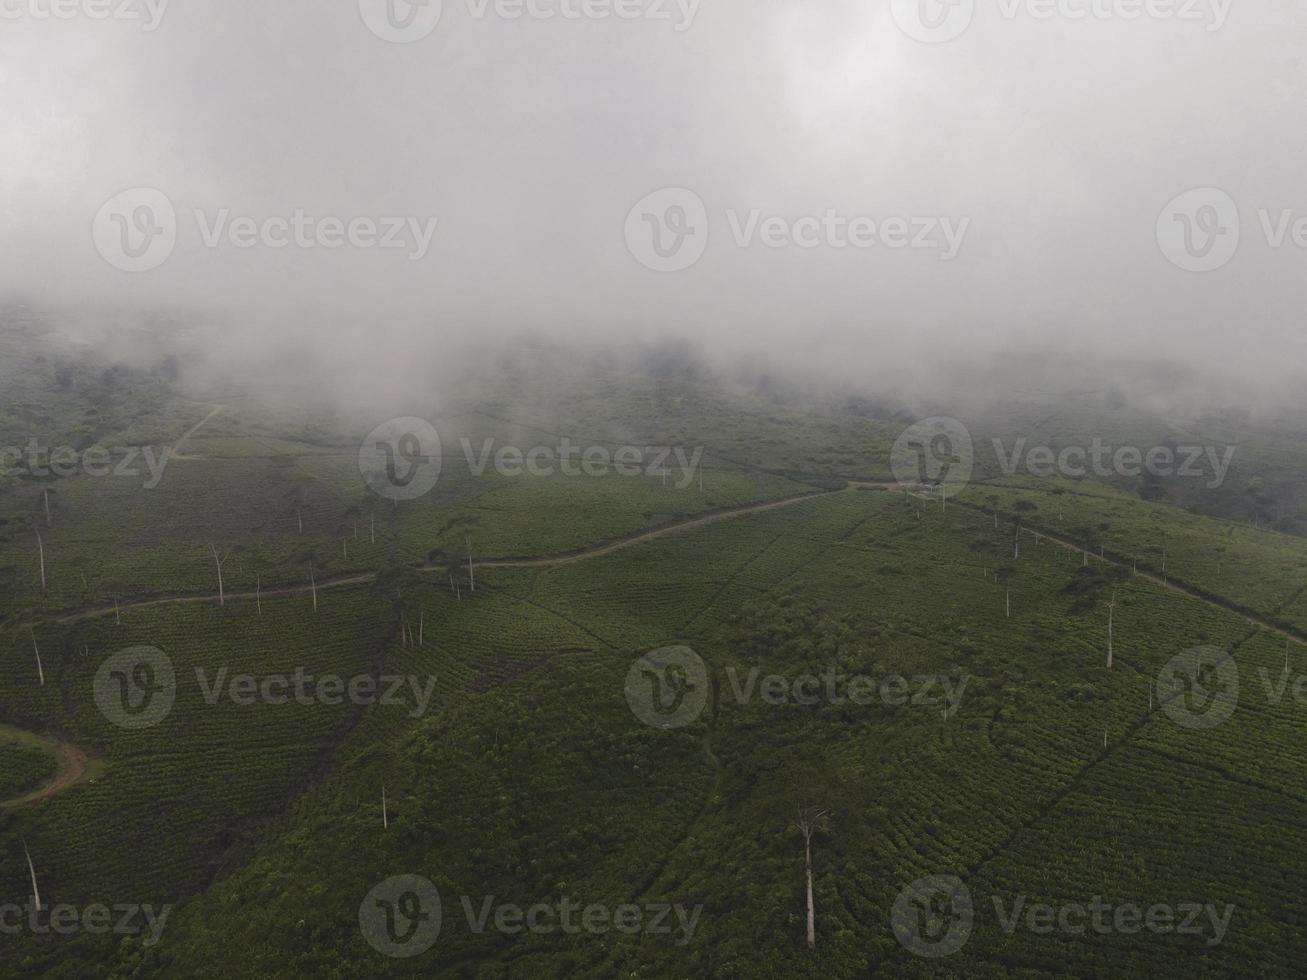 Aerial view of foggy mist tea plantation in Indonesia photo